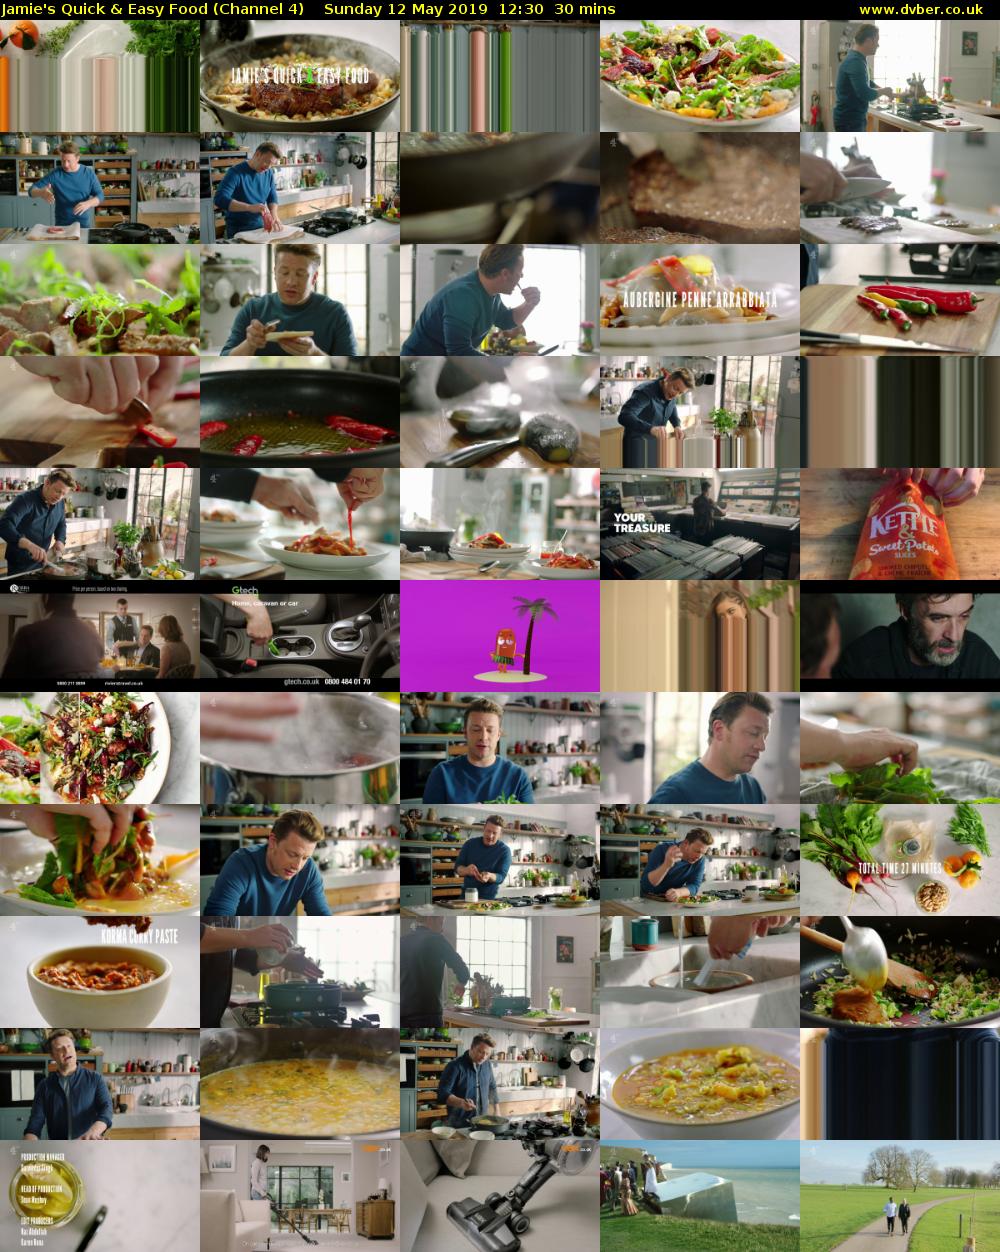 Jamie's Quick & Easy Food (Channel 4) Sunday 12 May 2019 12:30 - 13:00